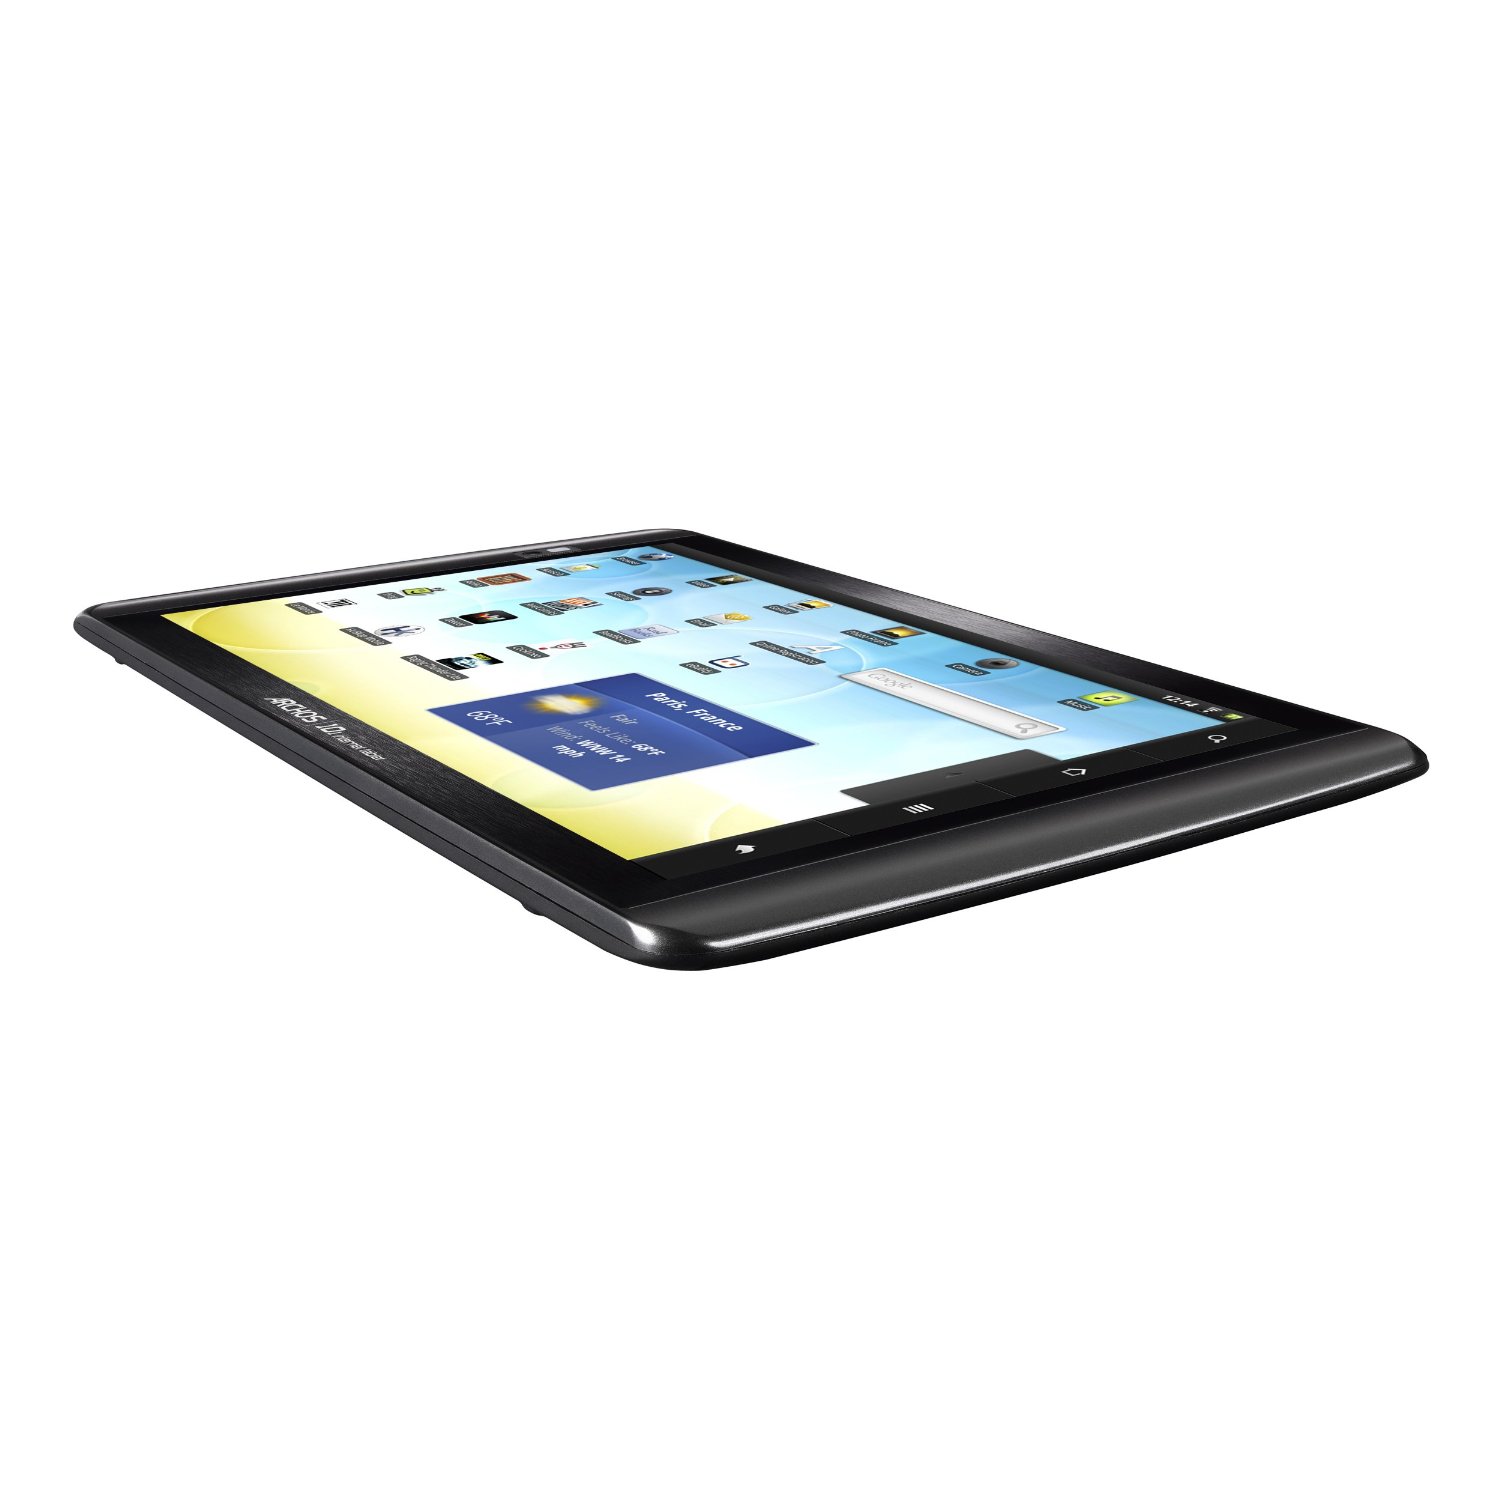 http://thetechjournal.com/wp-content/uploads/images/1108/1314386202-archos-101-android-powered-internet-tablet-8gb-3.jpg